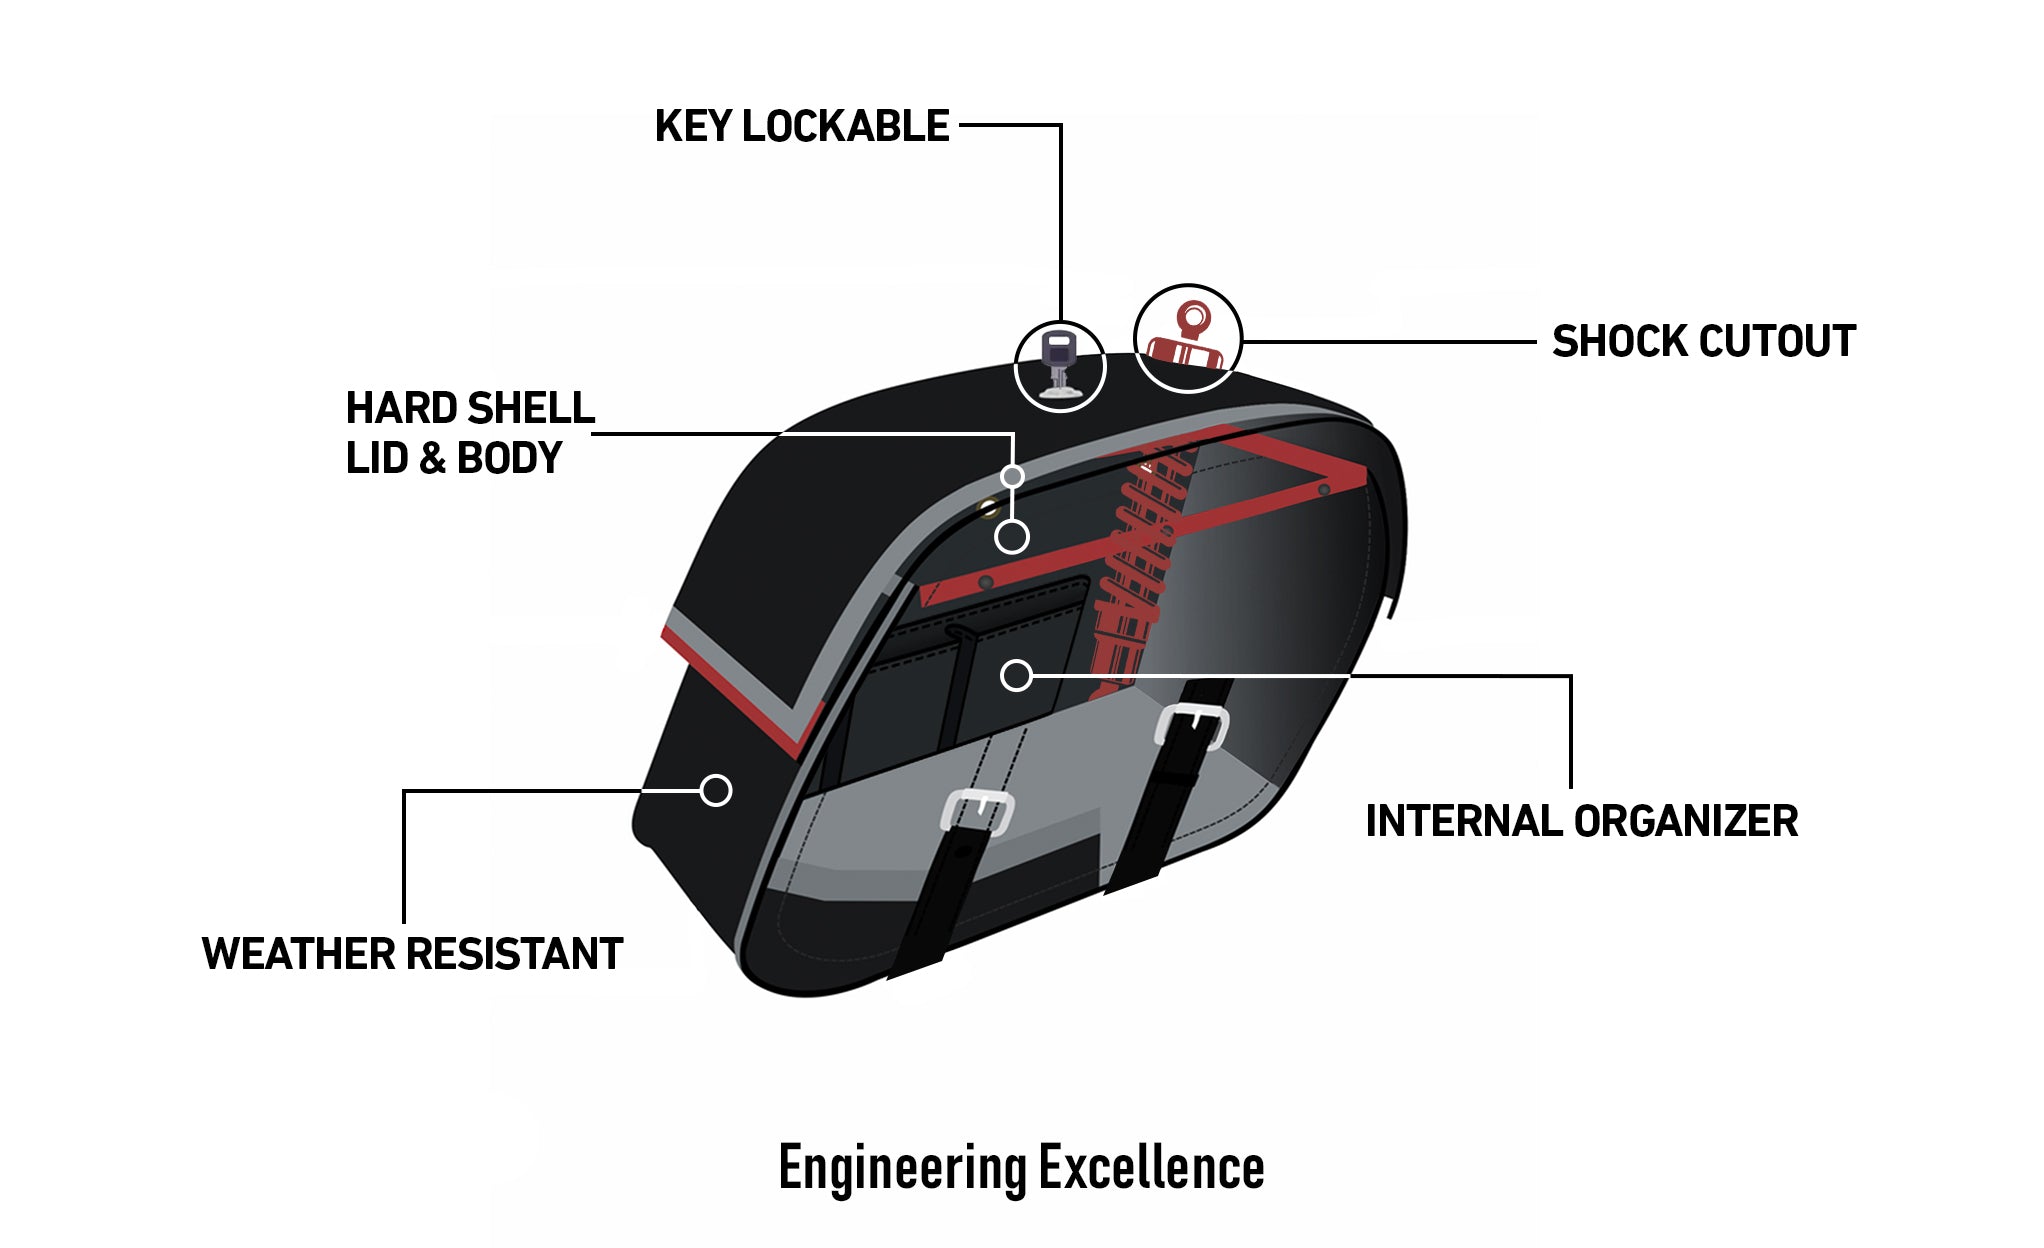 Viking Raven Extra Large Kawasaki Vulcan 500 En500 Shock Cut Out Leather Motorcycle Saddlebags Engineering Excellence with Bag on Bike @expand